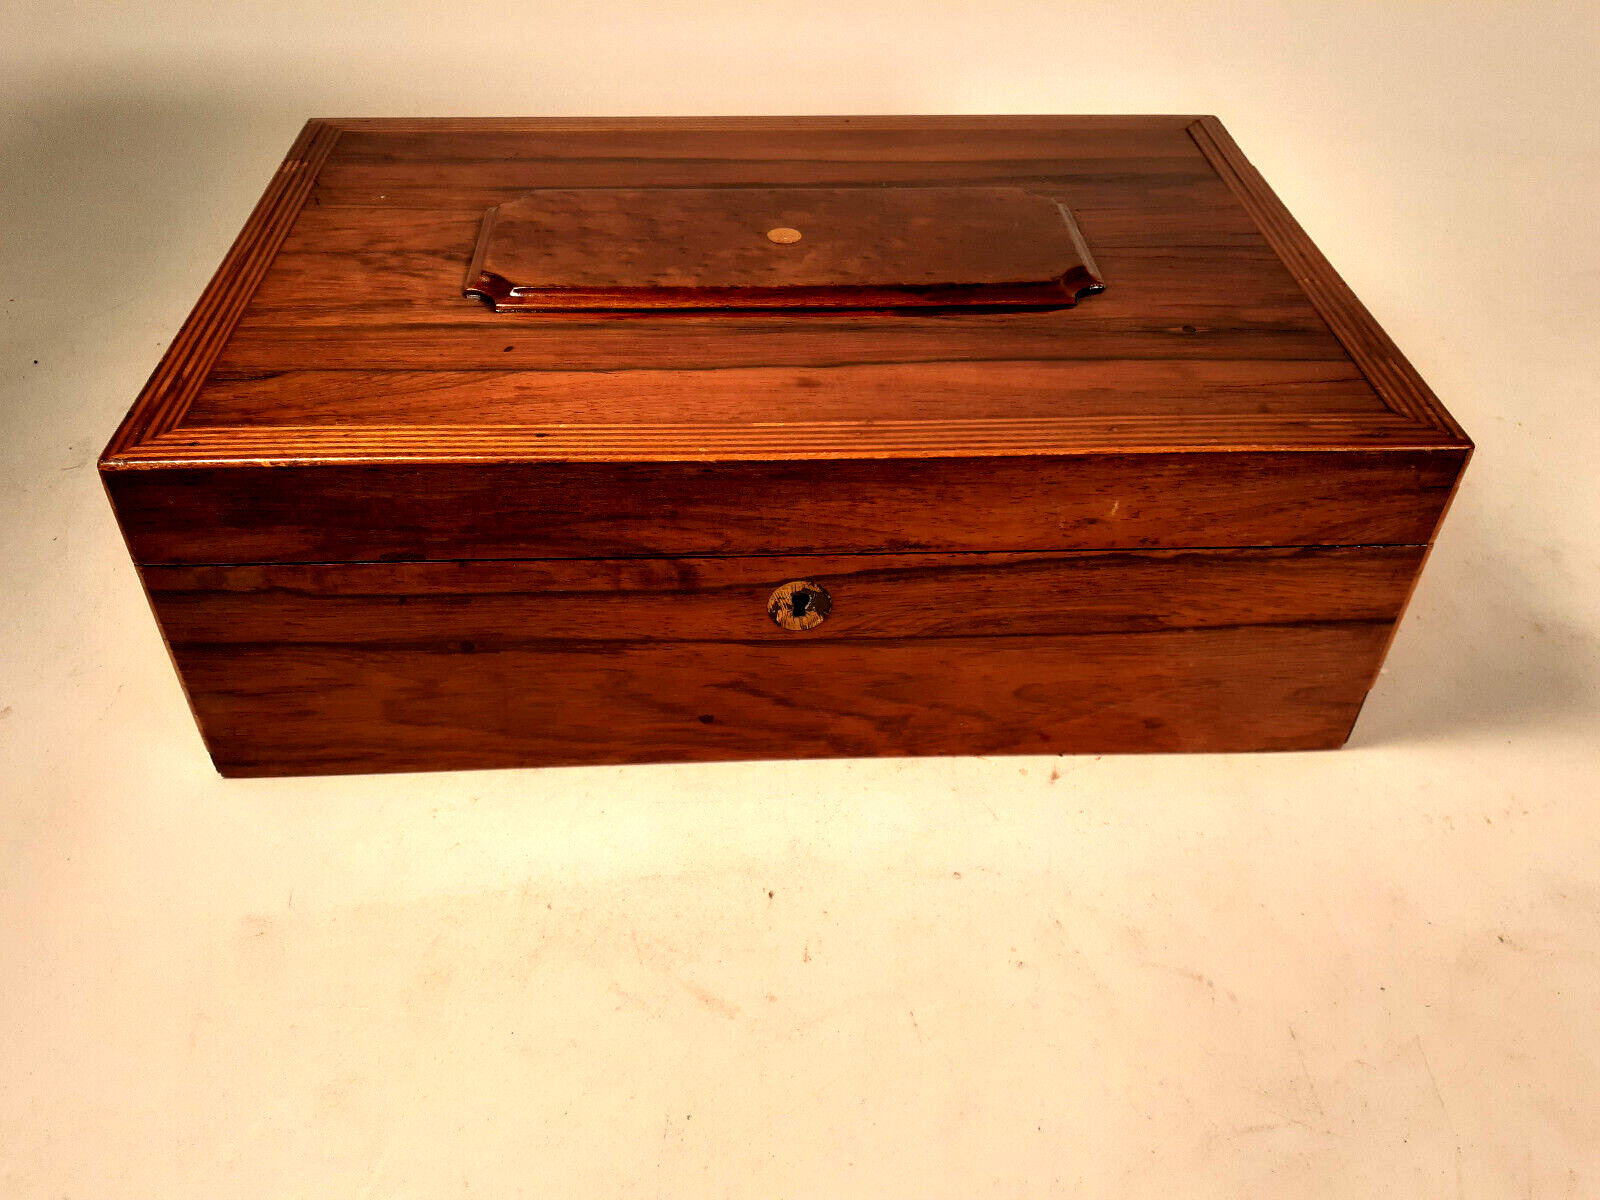 Rare and Beautiful Victorian Rwood Dresser/Desk Box, Finely Crafted, Dated 1873